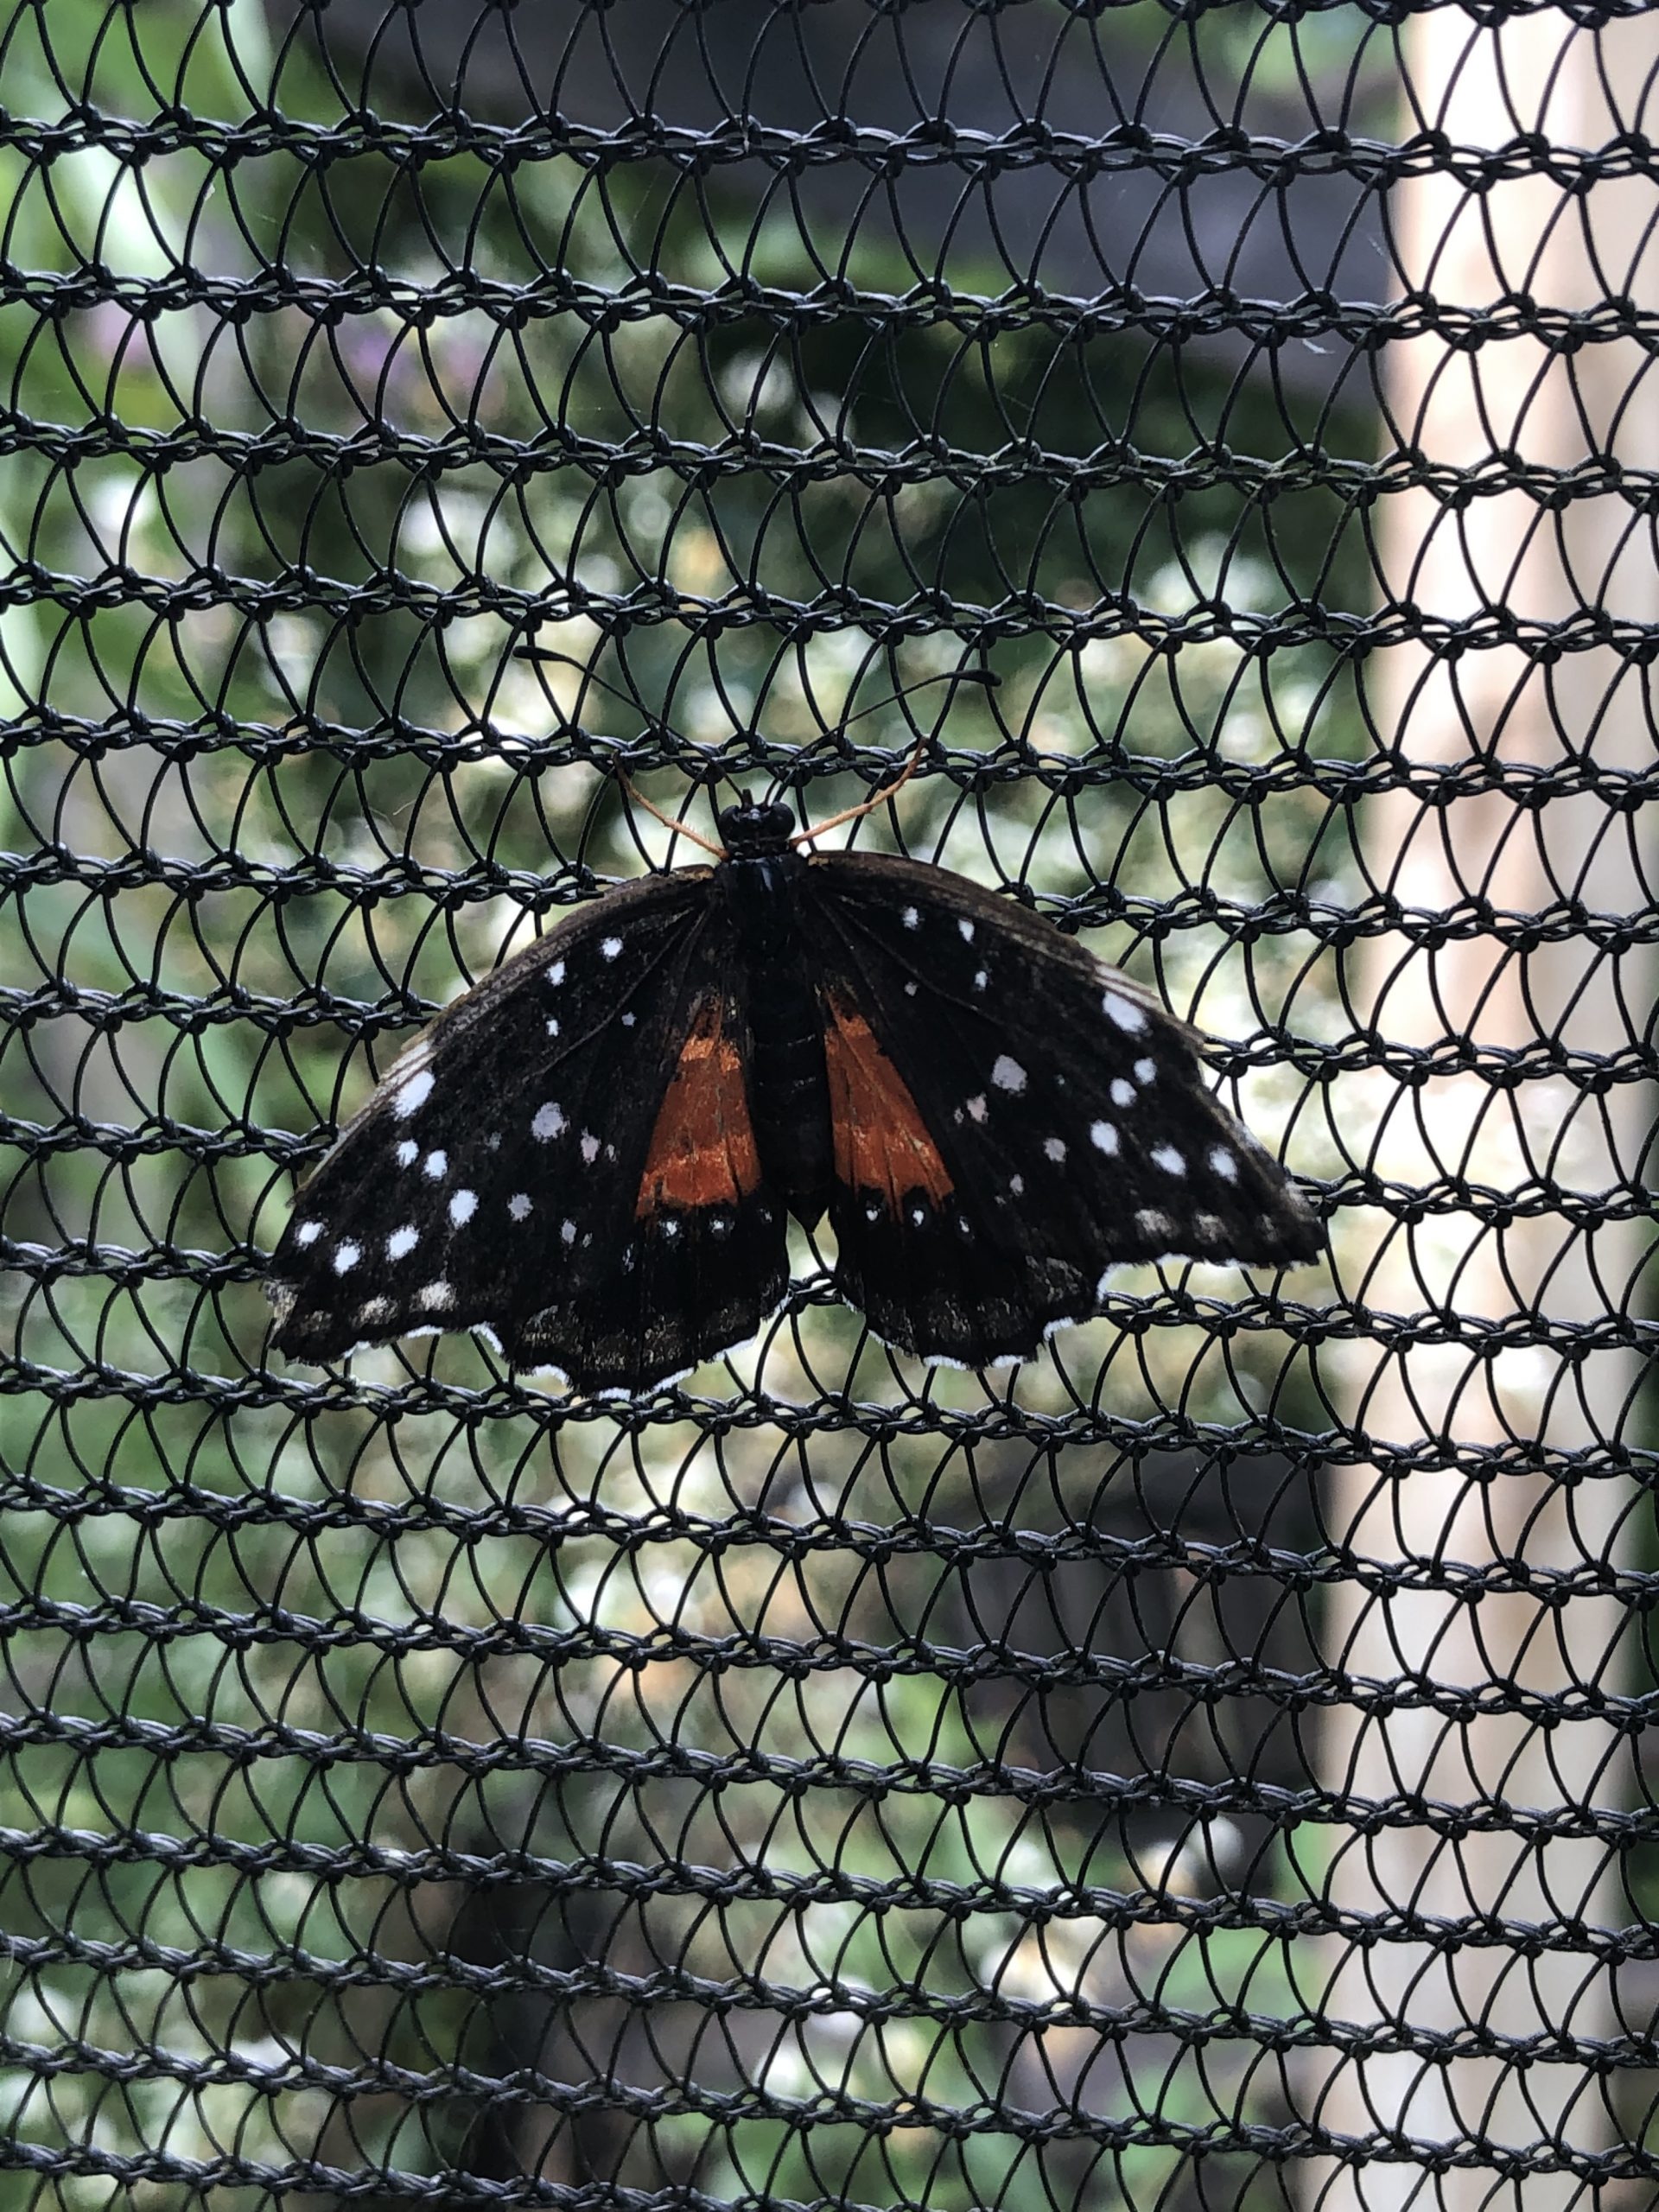 Crimson patch butterfly